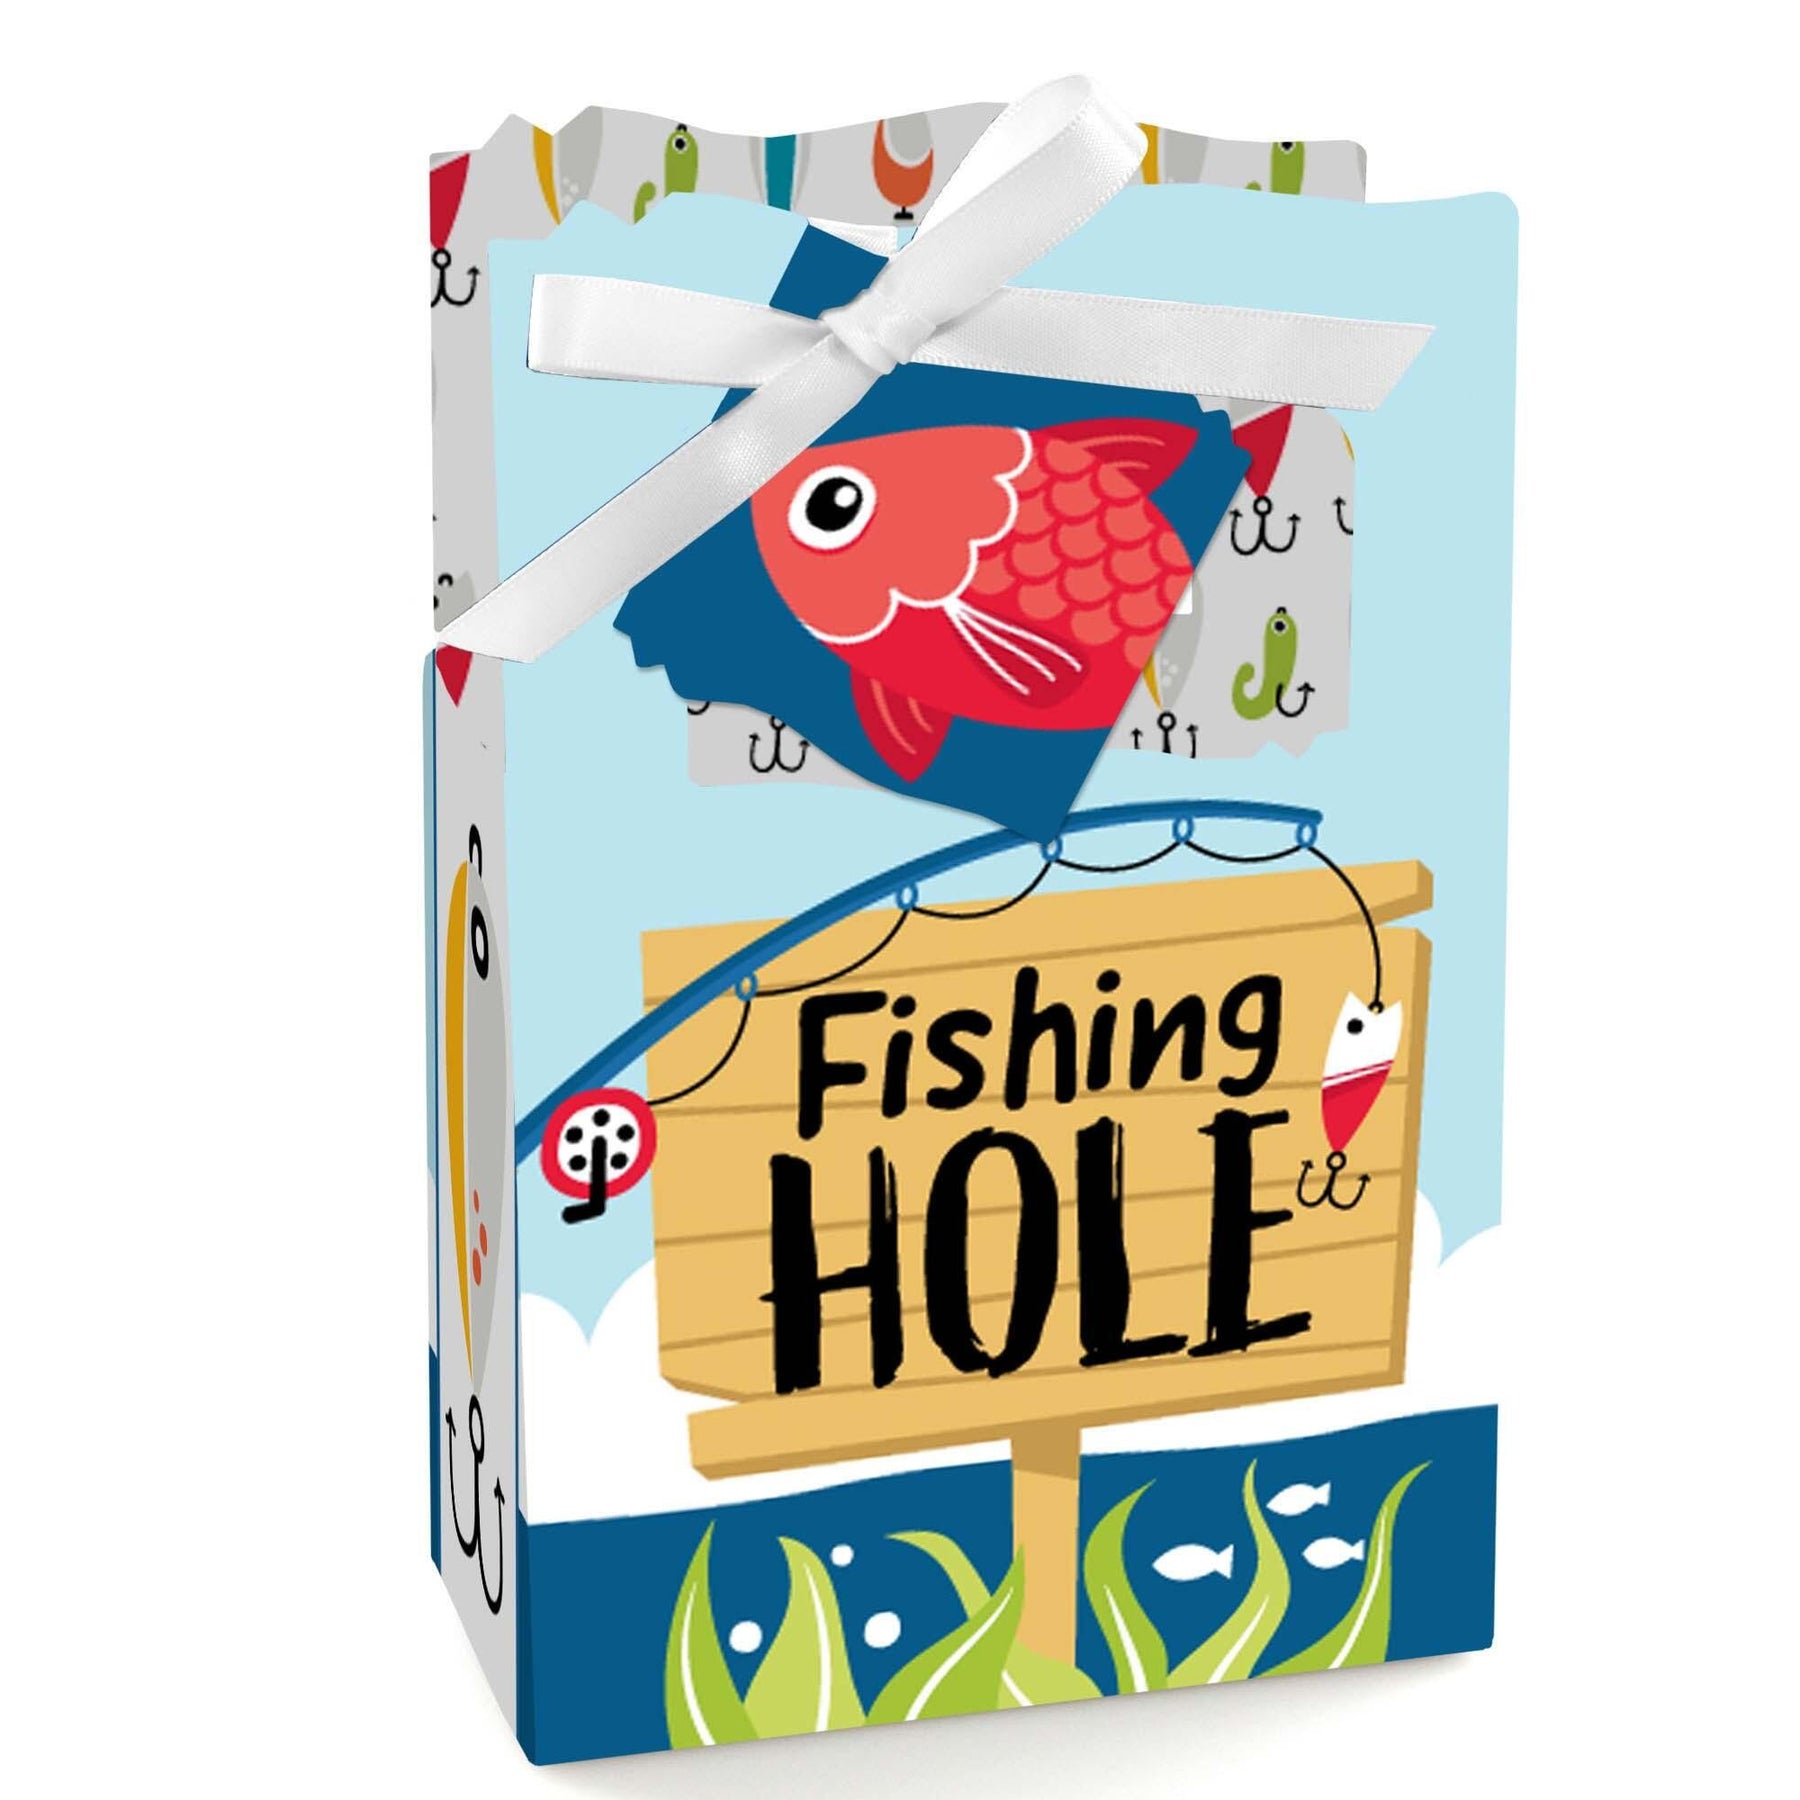 Let's Go Fishing - Fish Themed Party or Birthday Party Favor Boxes